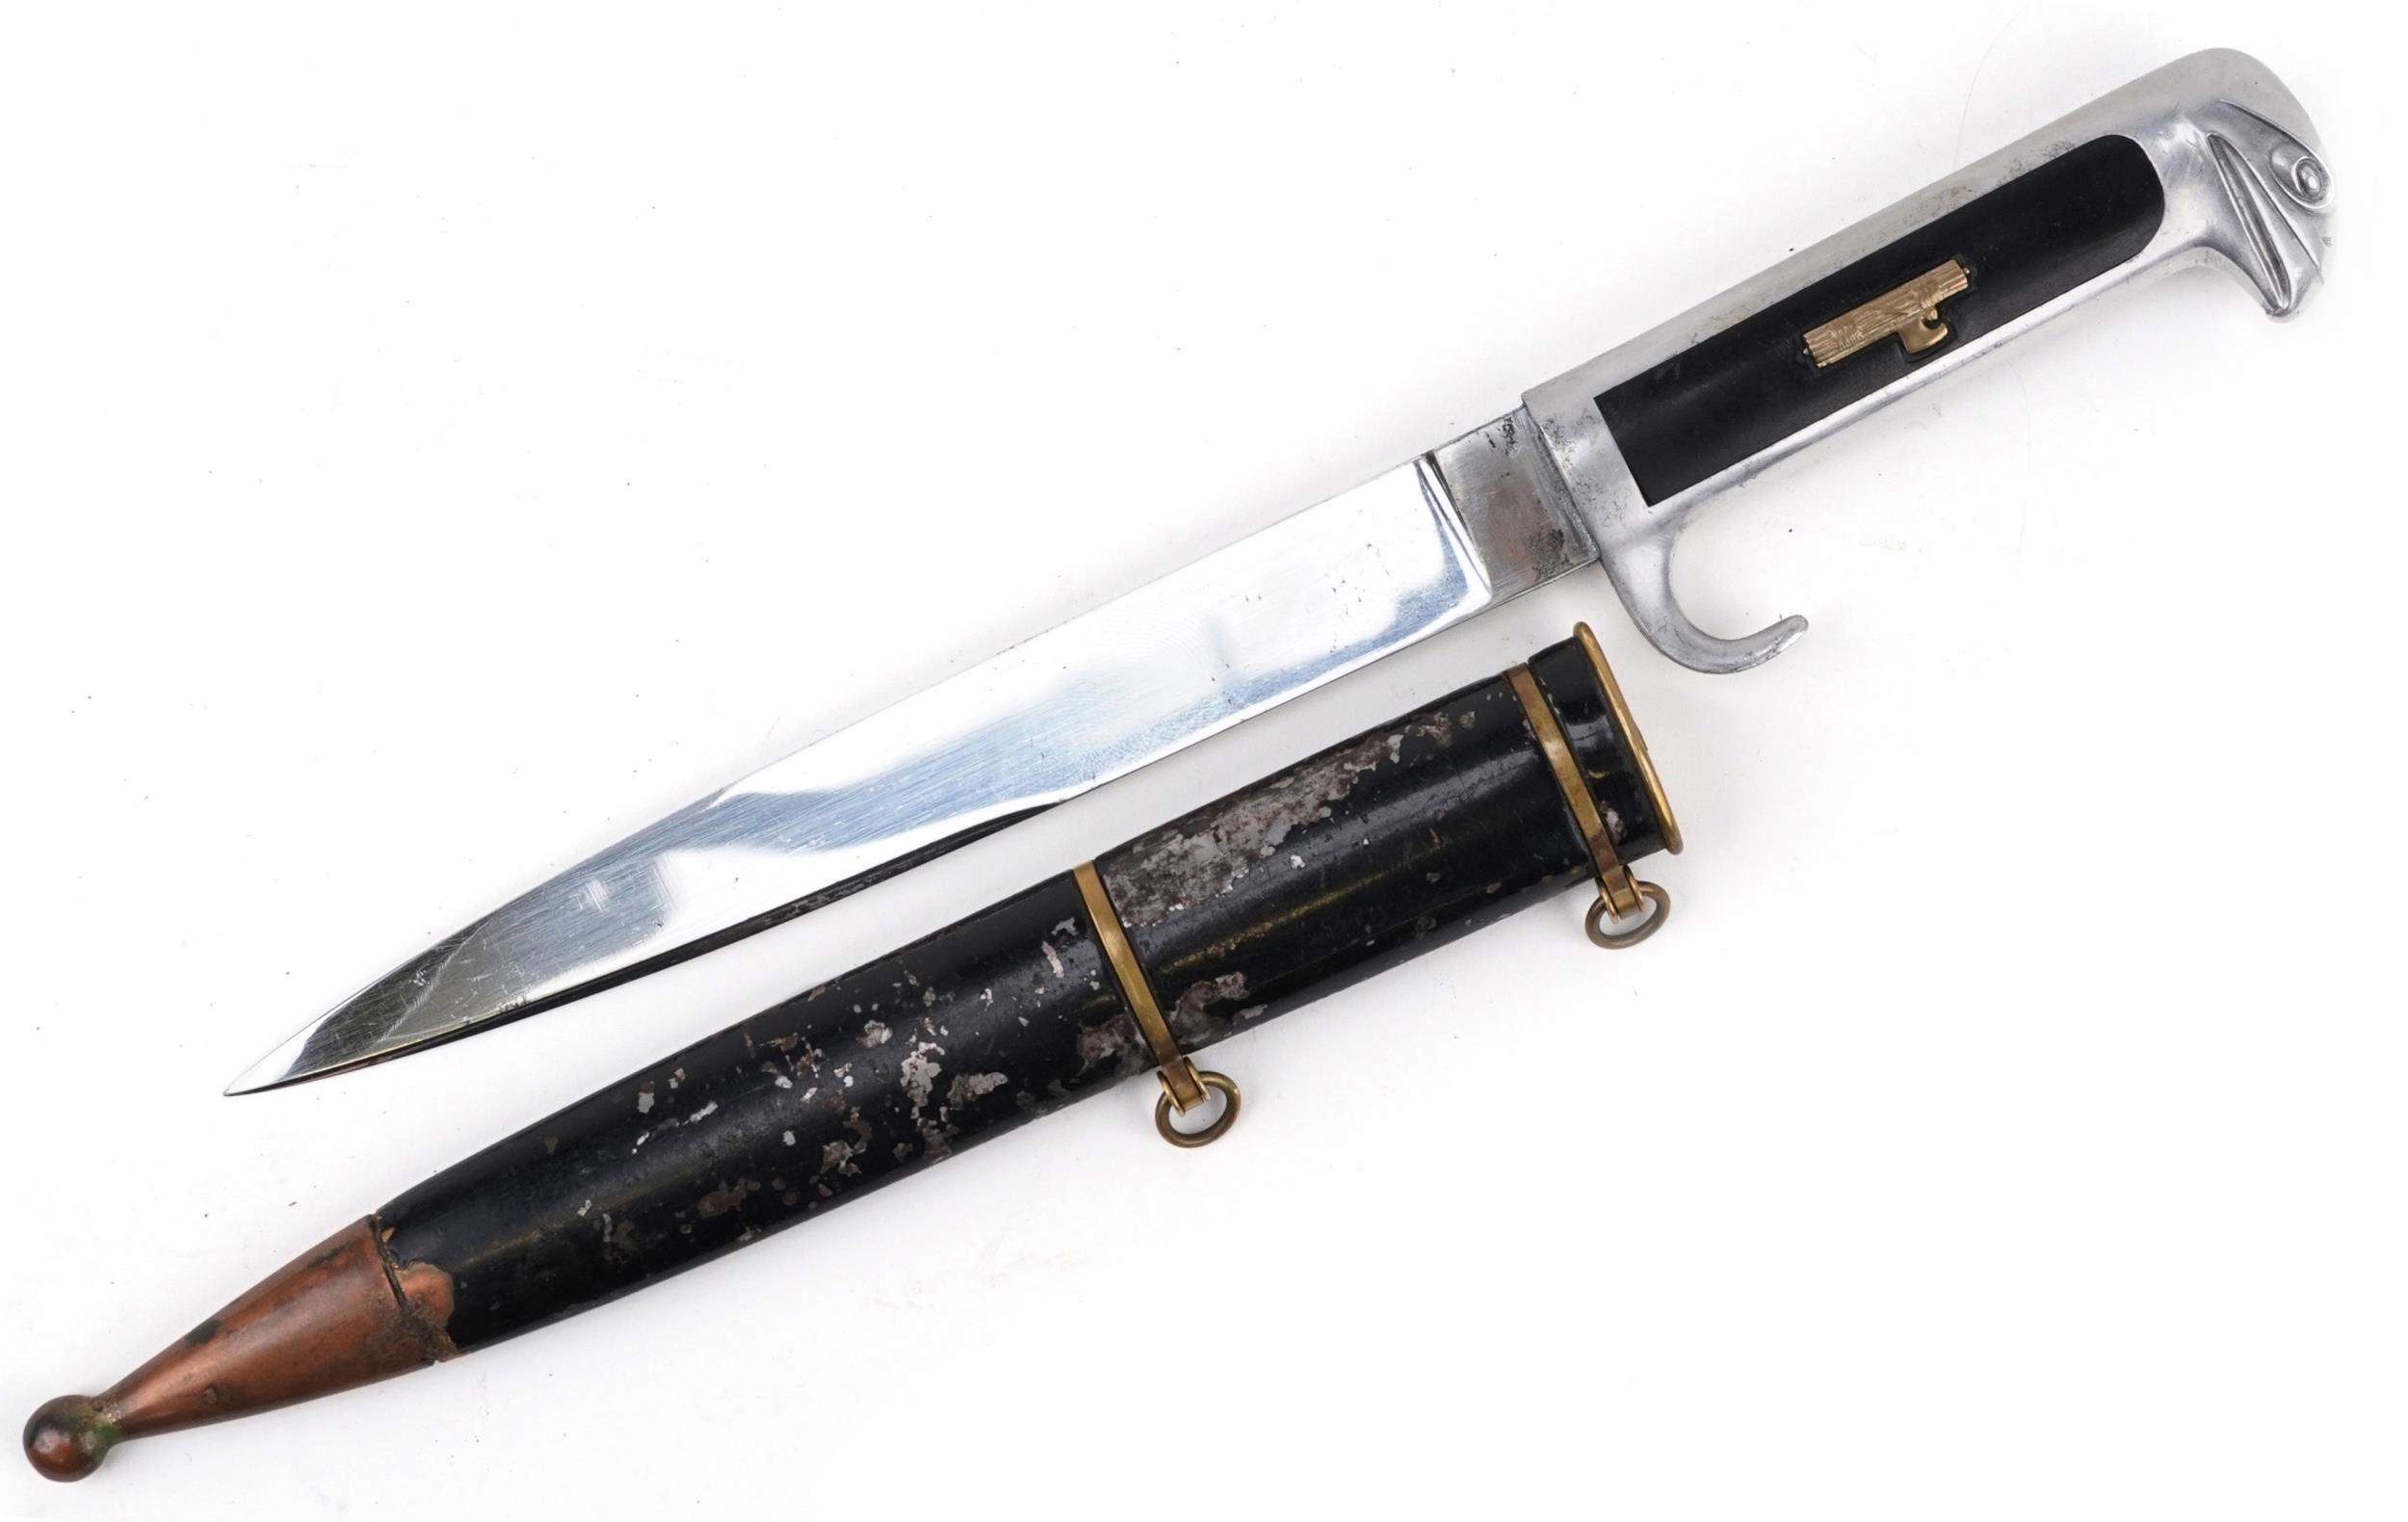 Italian military interest leader's NVSN dagger with scabbard and steel blade, 34.5cm in length